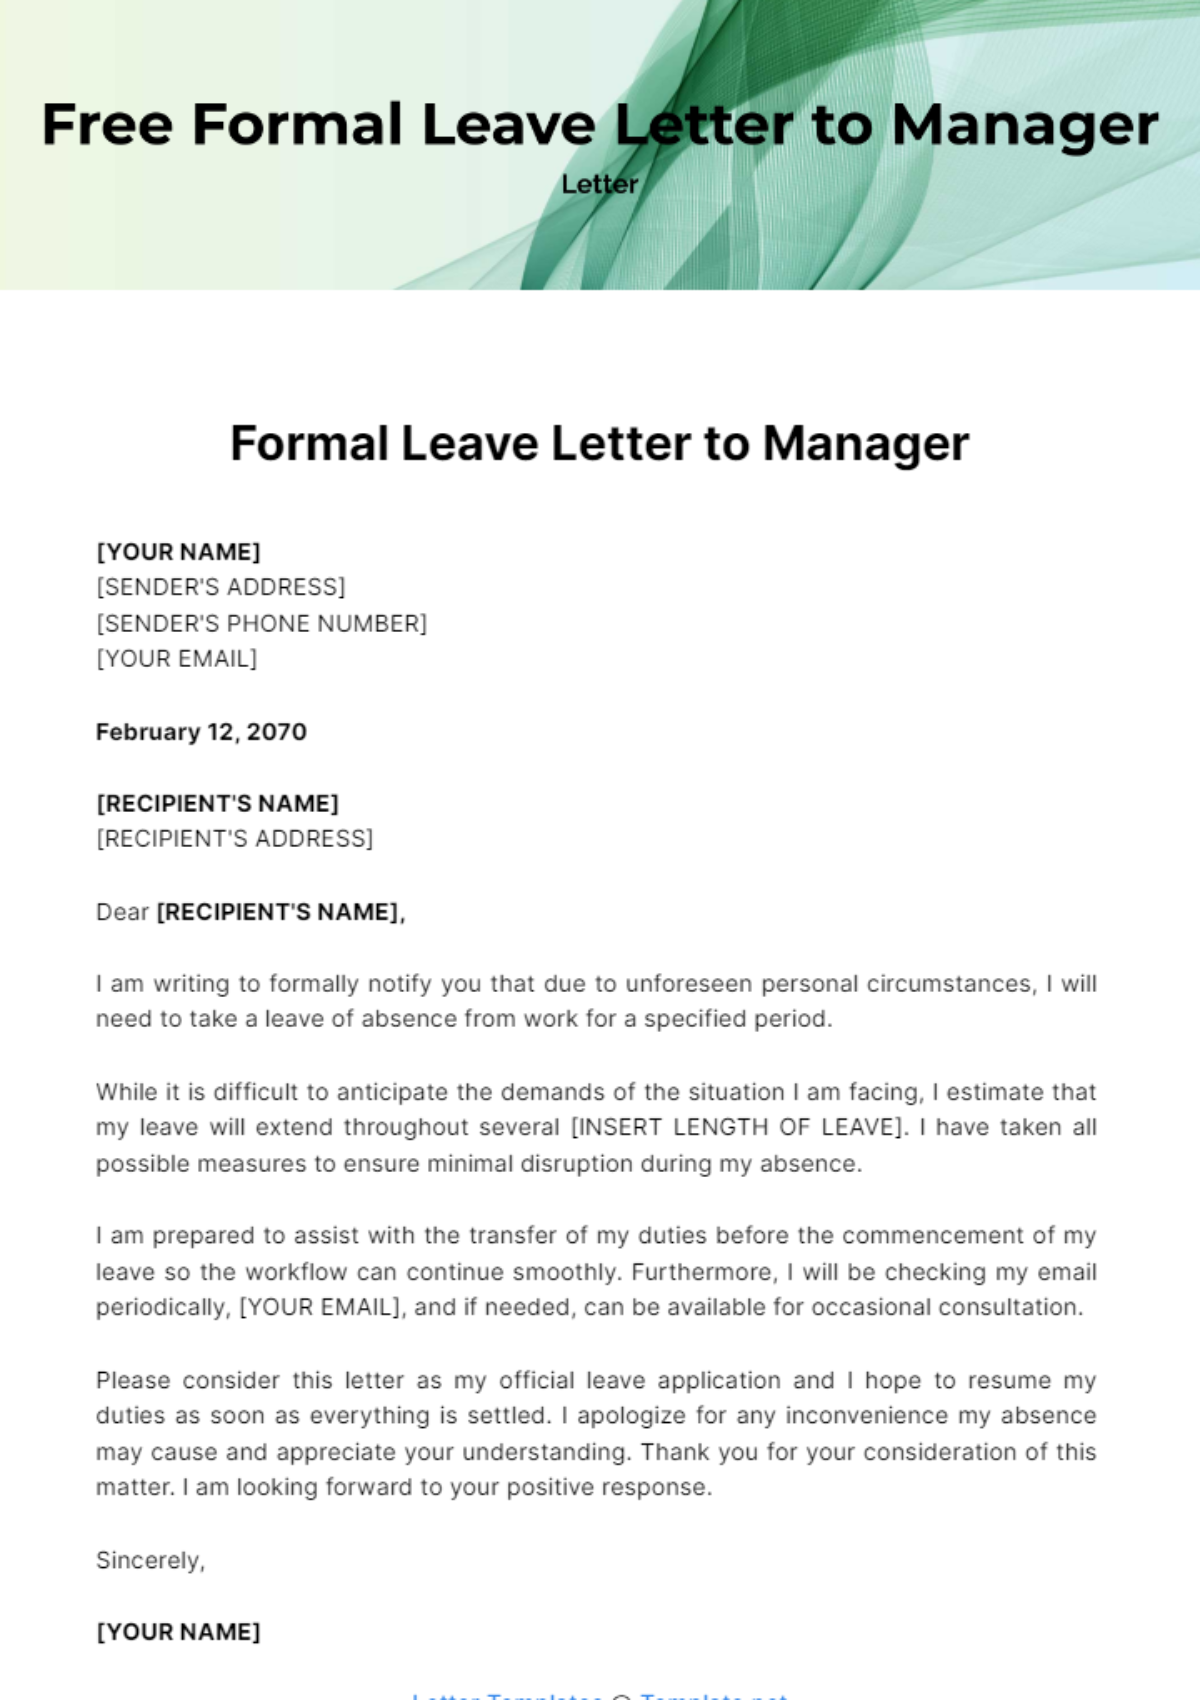 Free Formal Leave Letter to Manager Template